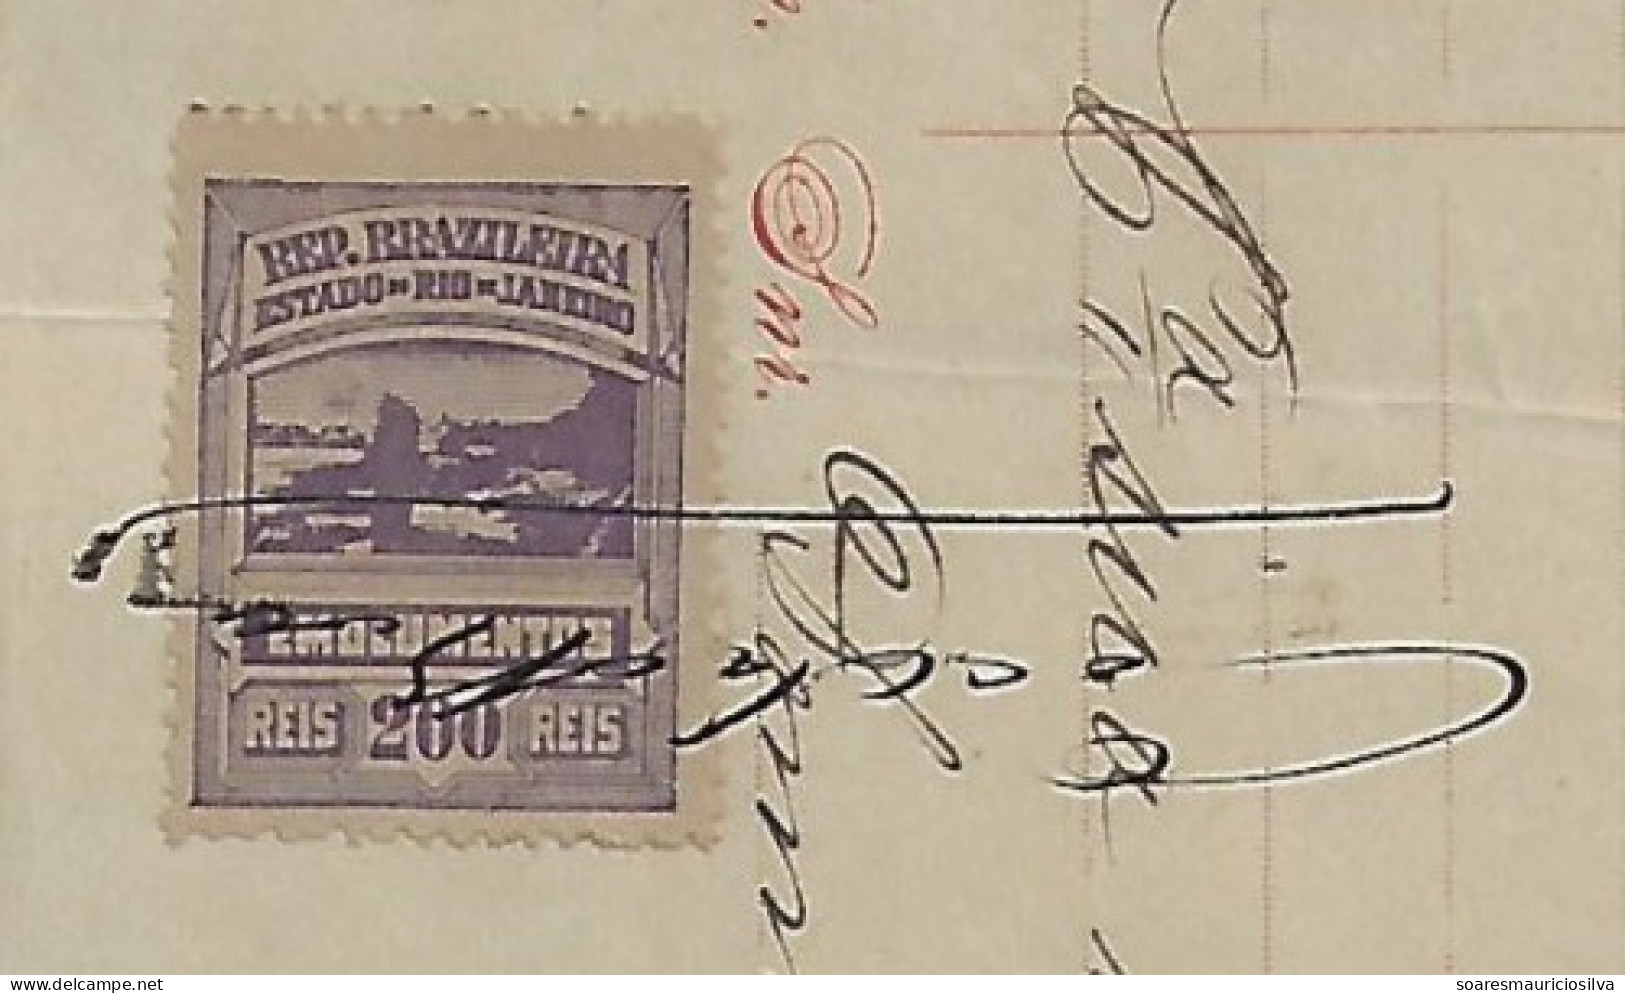 Brazil 1885 Olavo & Mignot Invoice Issued In Campos State Of Rio De Janeiro Tax Stamp Fees 200 Réis - Storia Postale